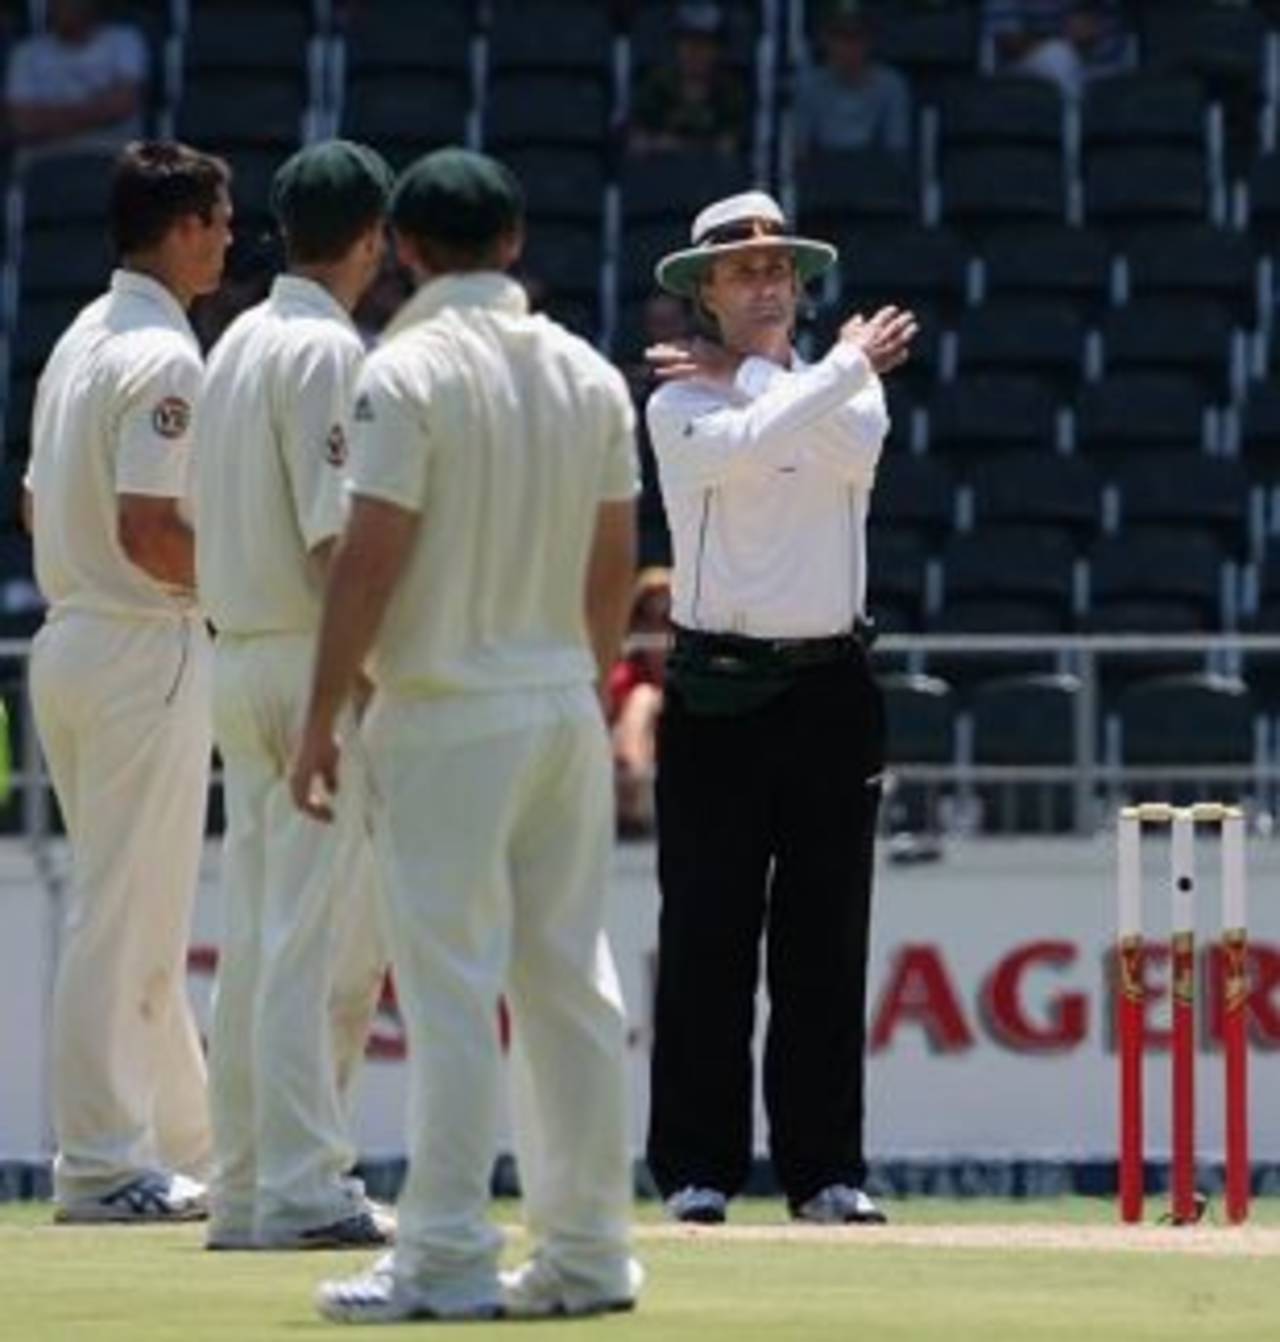 The umpire is not always right, but nor is the referral system foolproof&nbsp;&nbsp;&bull;&nbsp;&nbsp;Getty Images